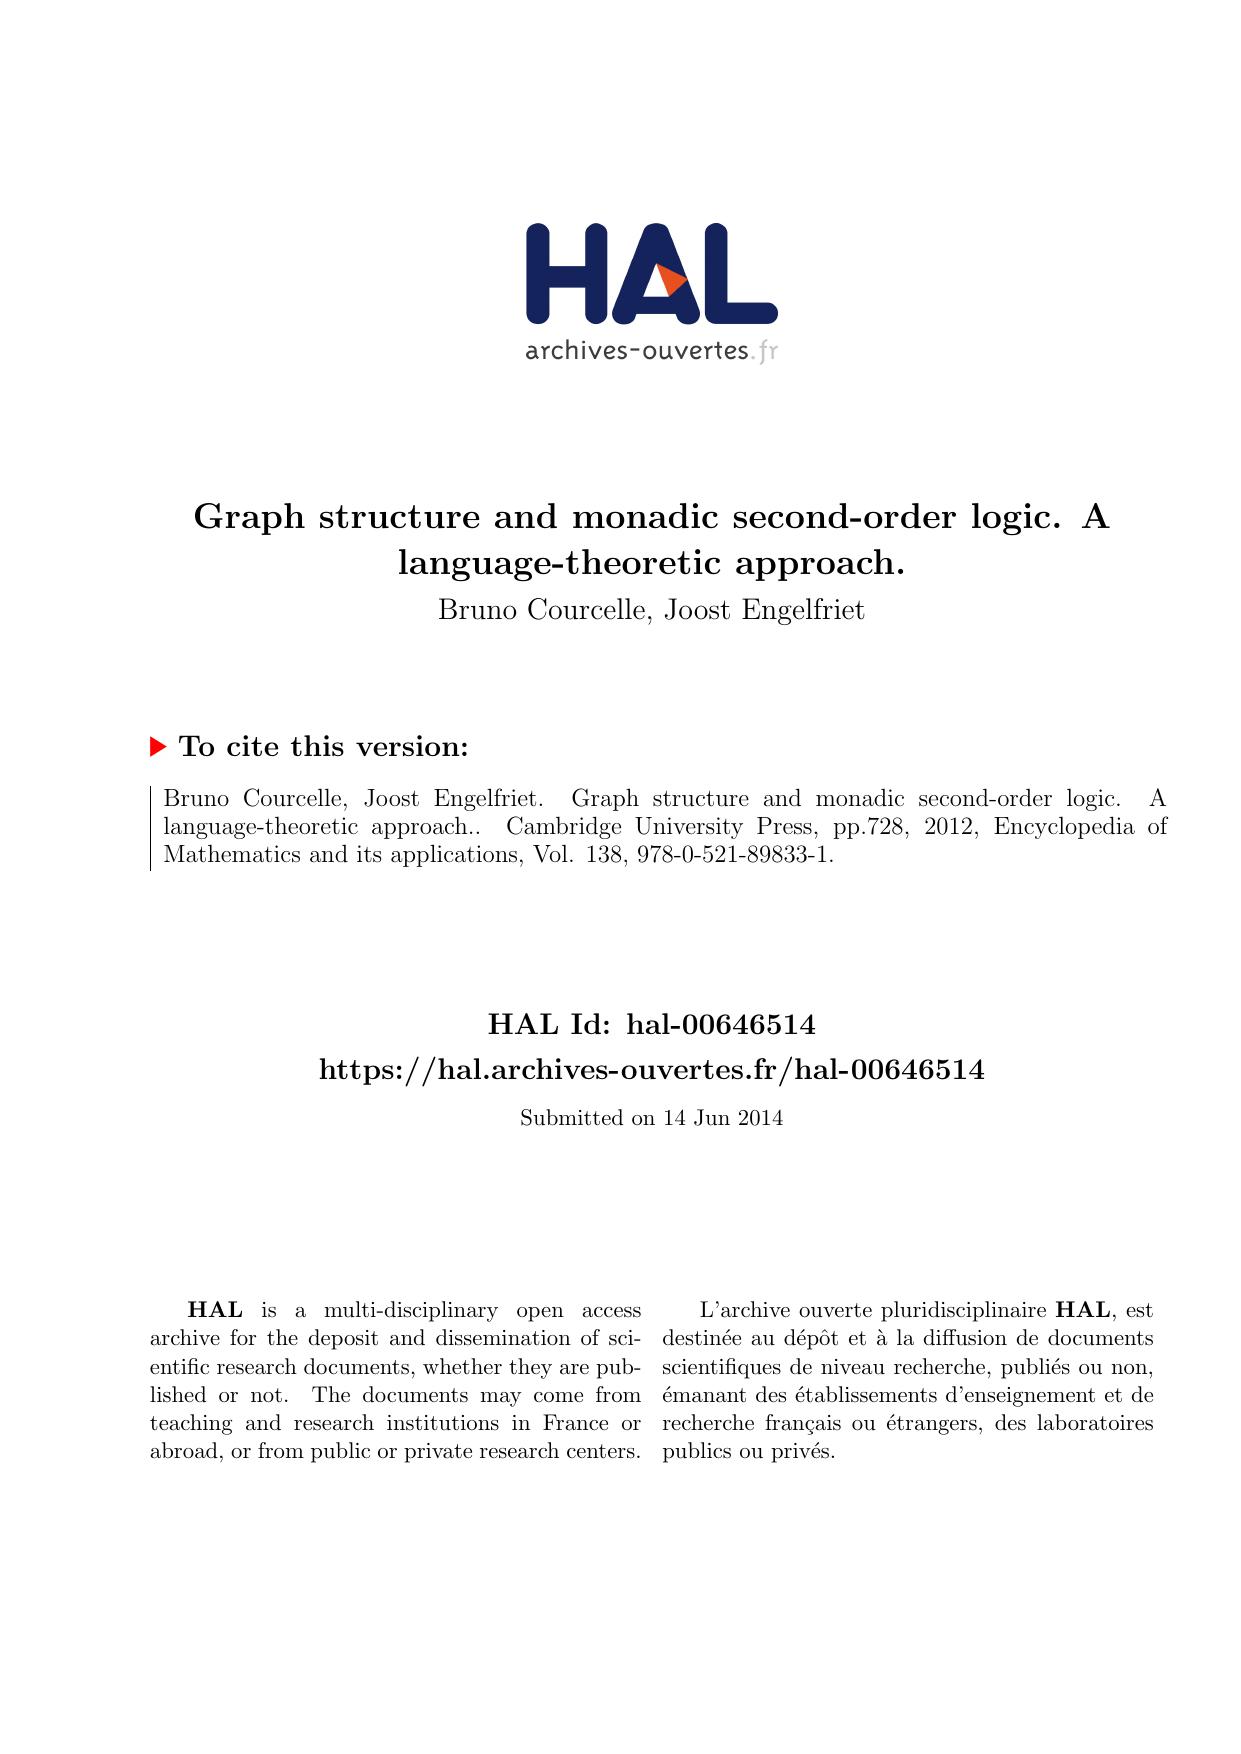 Graph structure and monadic second-order logic. A language-theoretic approach.